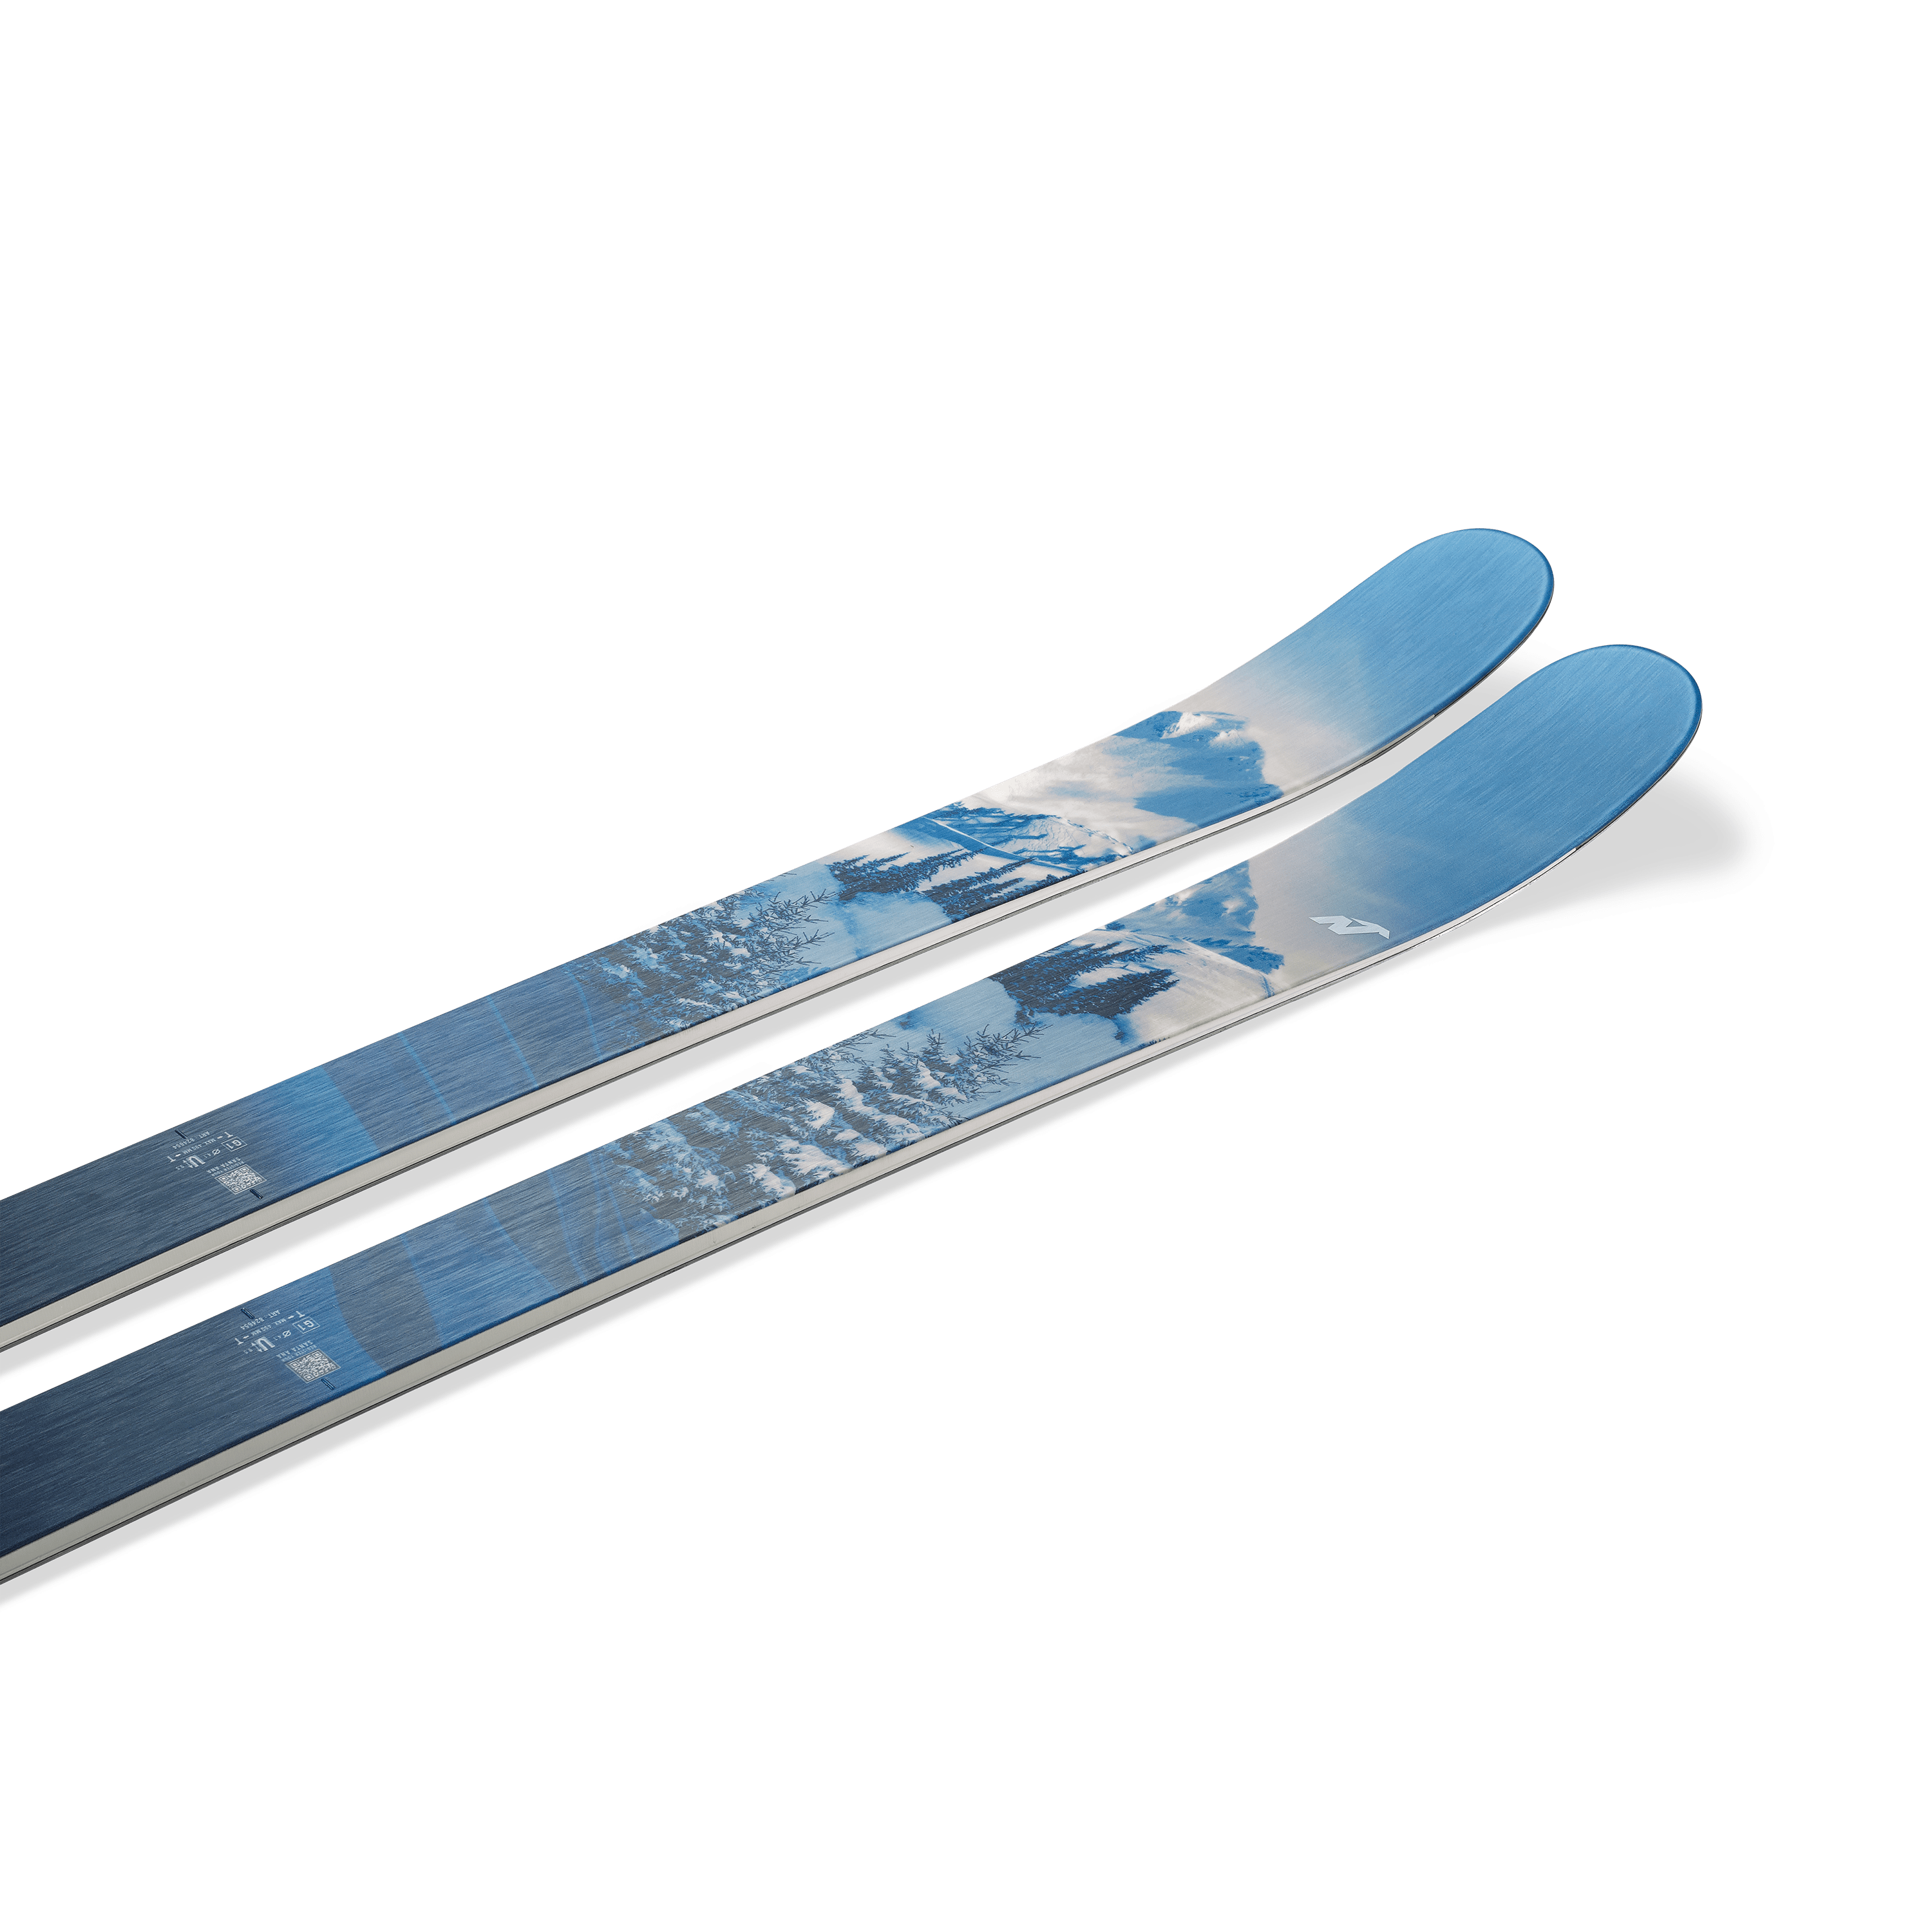 Picture of the Nordica Santa ana 93 skis.